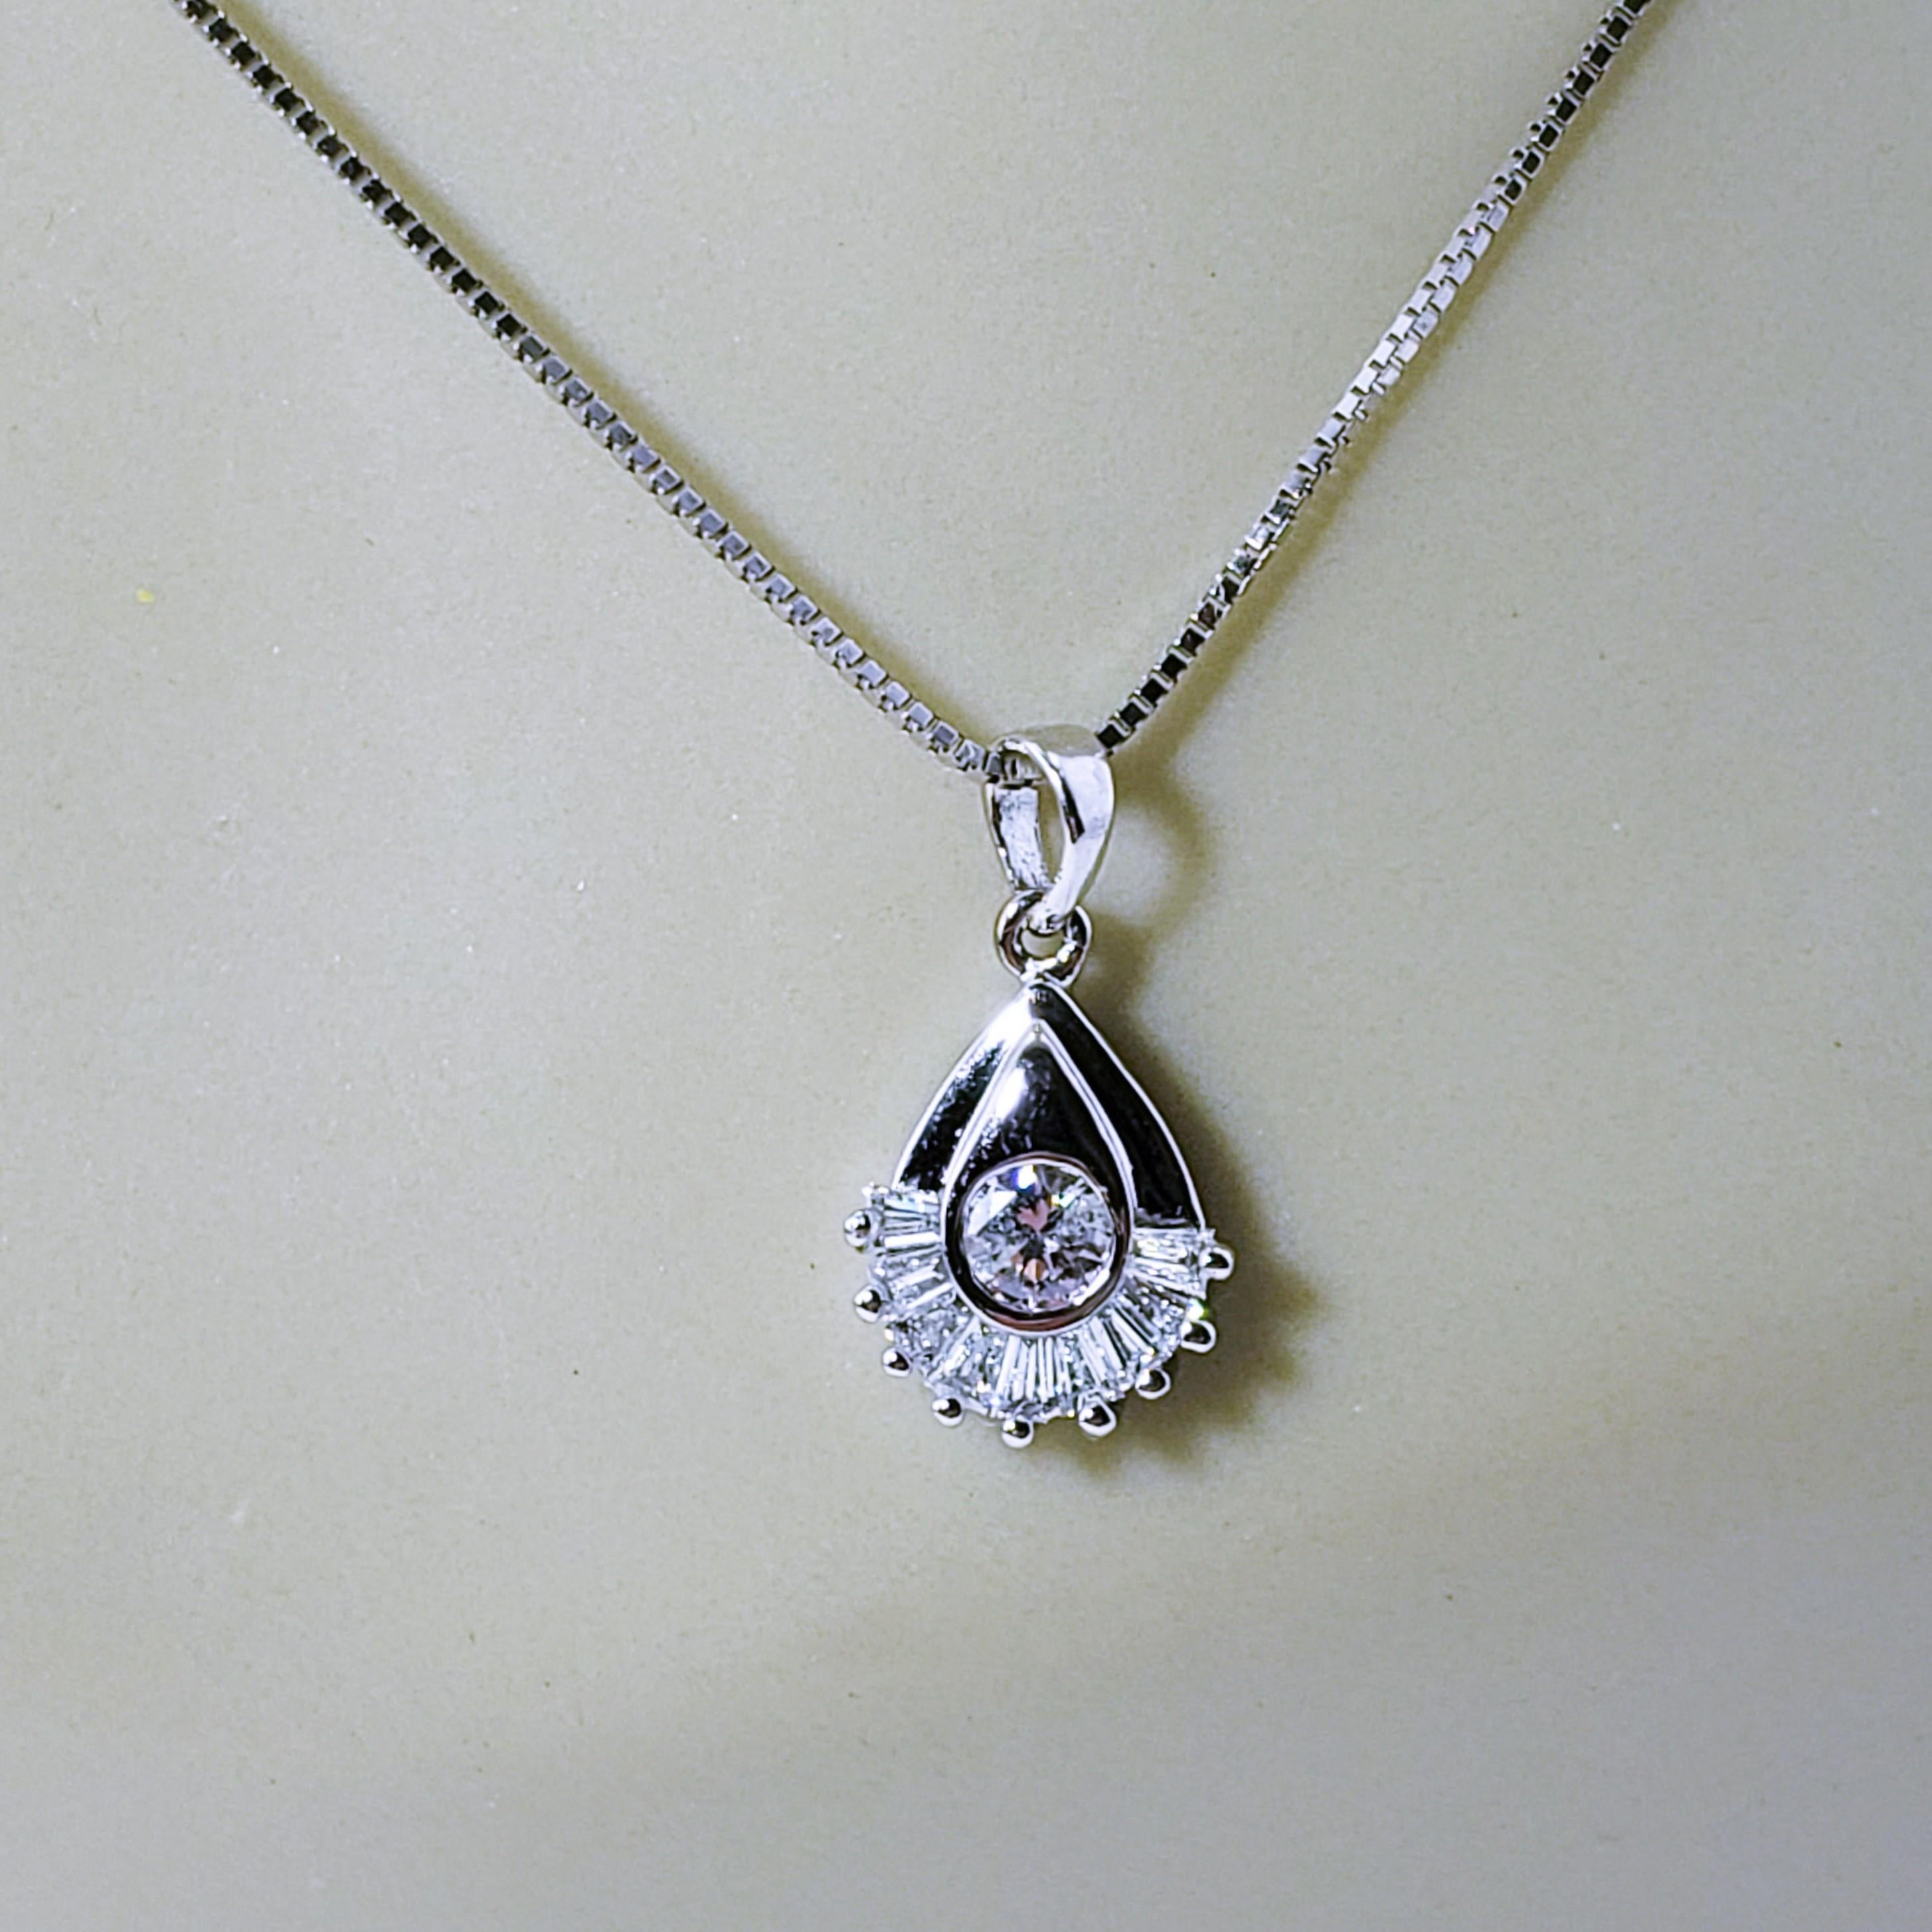 14 Karat White Gold and Diamond Pendant Necklace For Sale 3